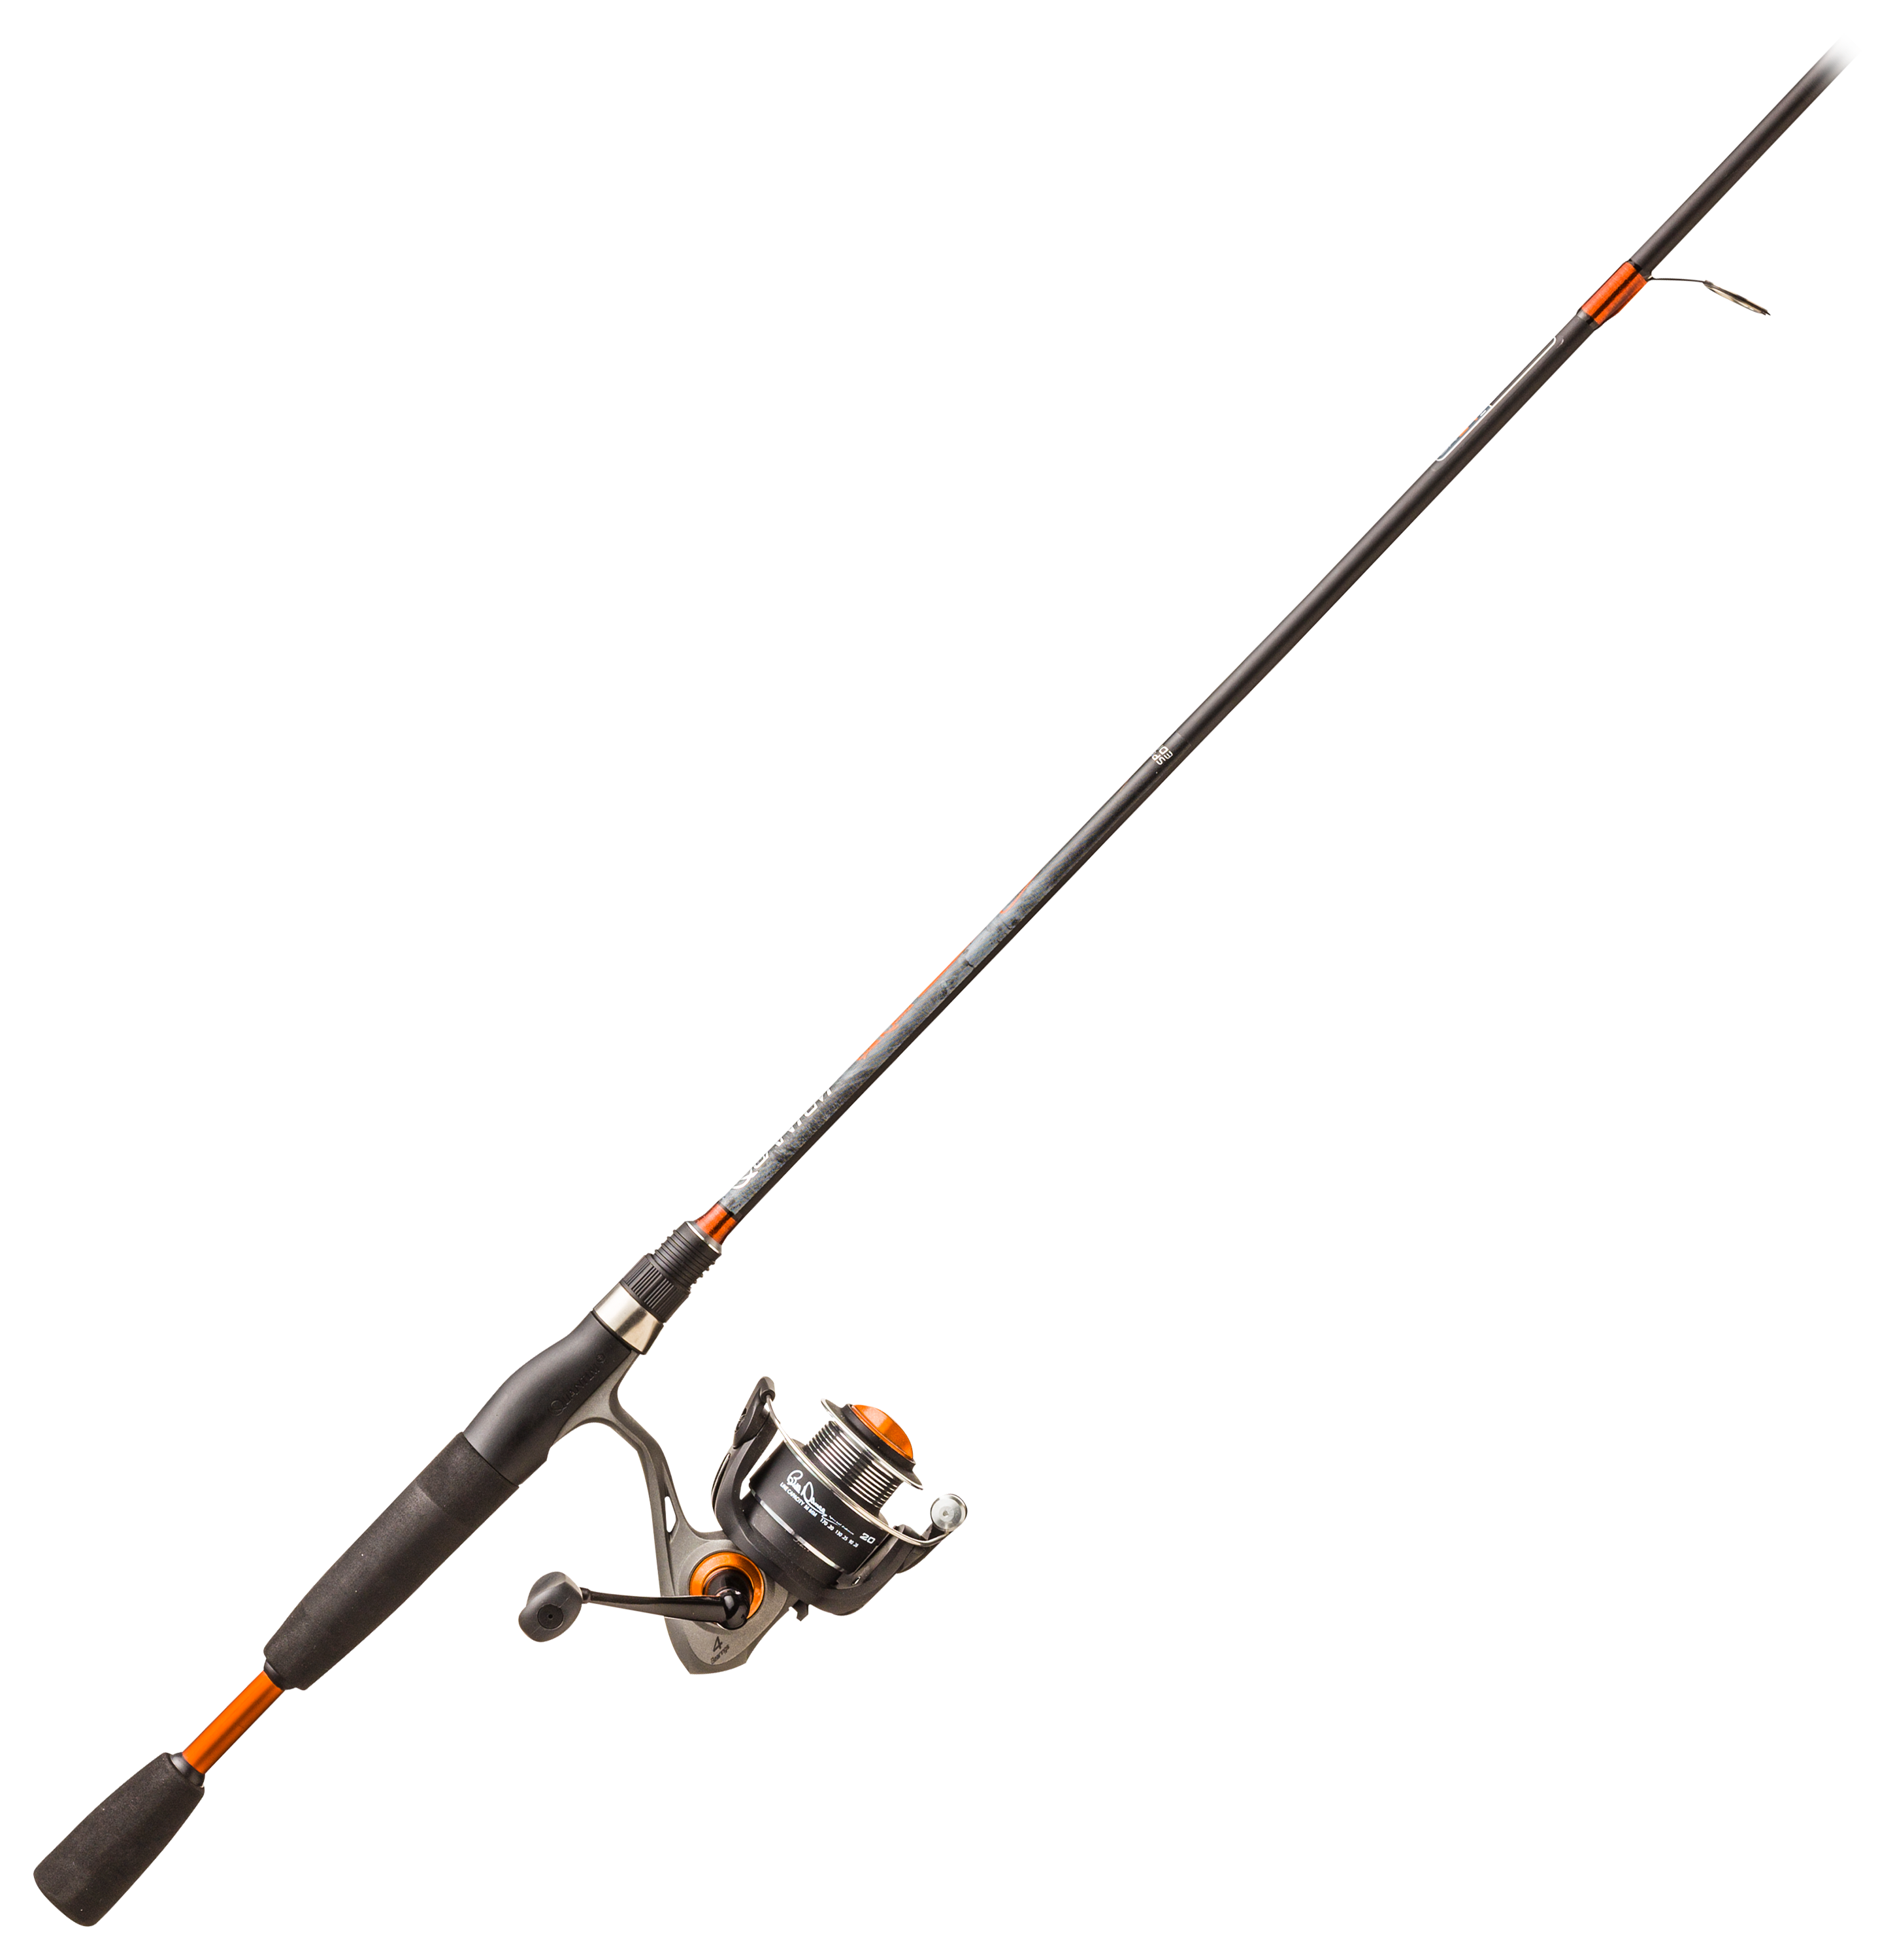 Quantum Bill Dance Special Edition Spinning Rod and Reel Combo - Model DSLS10501ULG